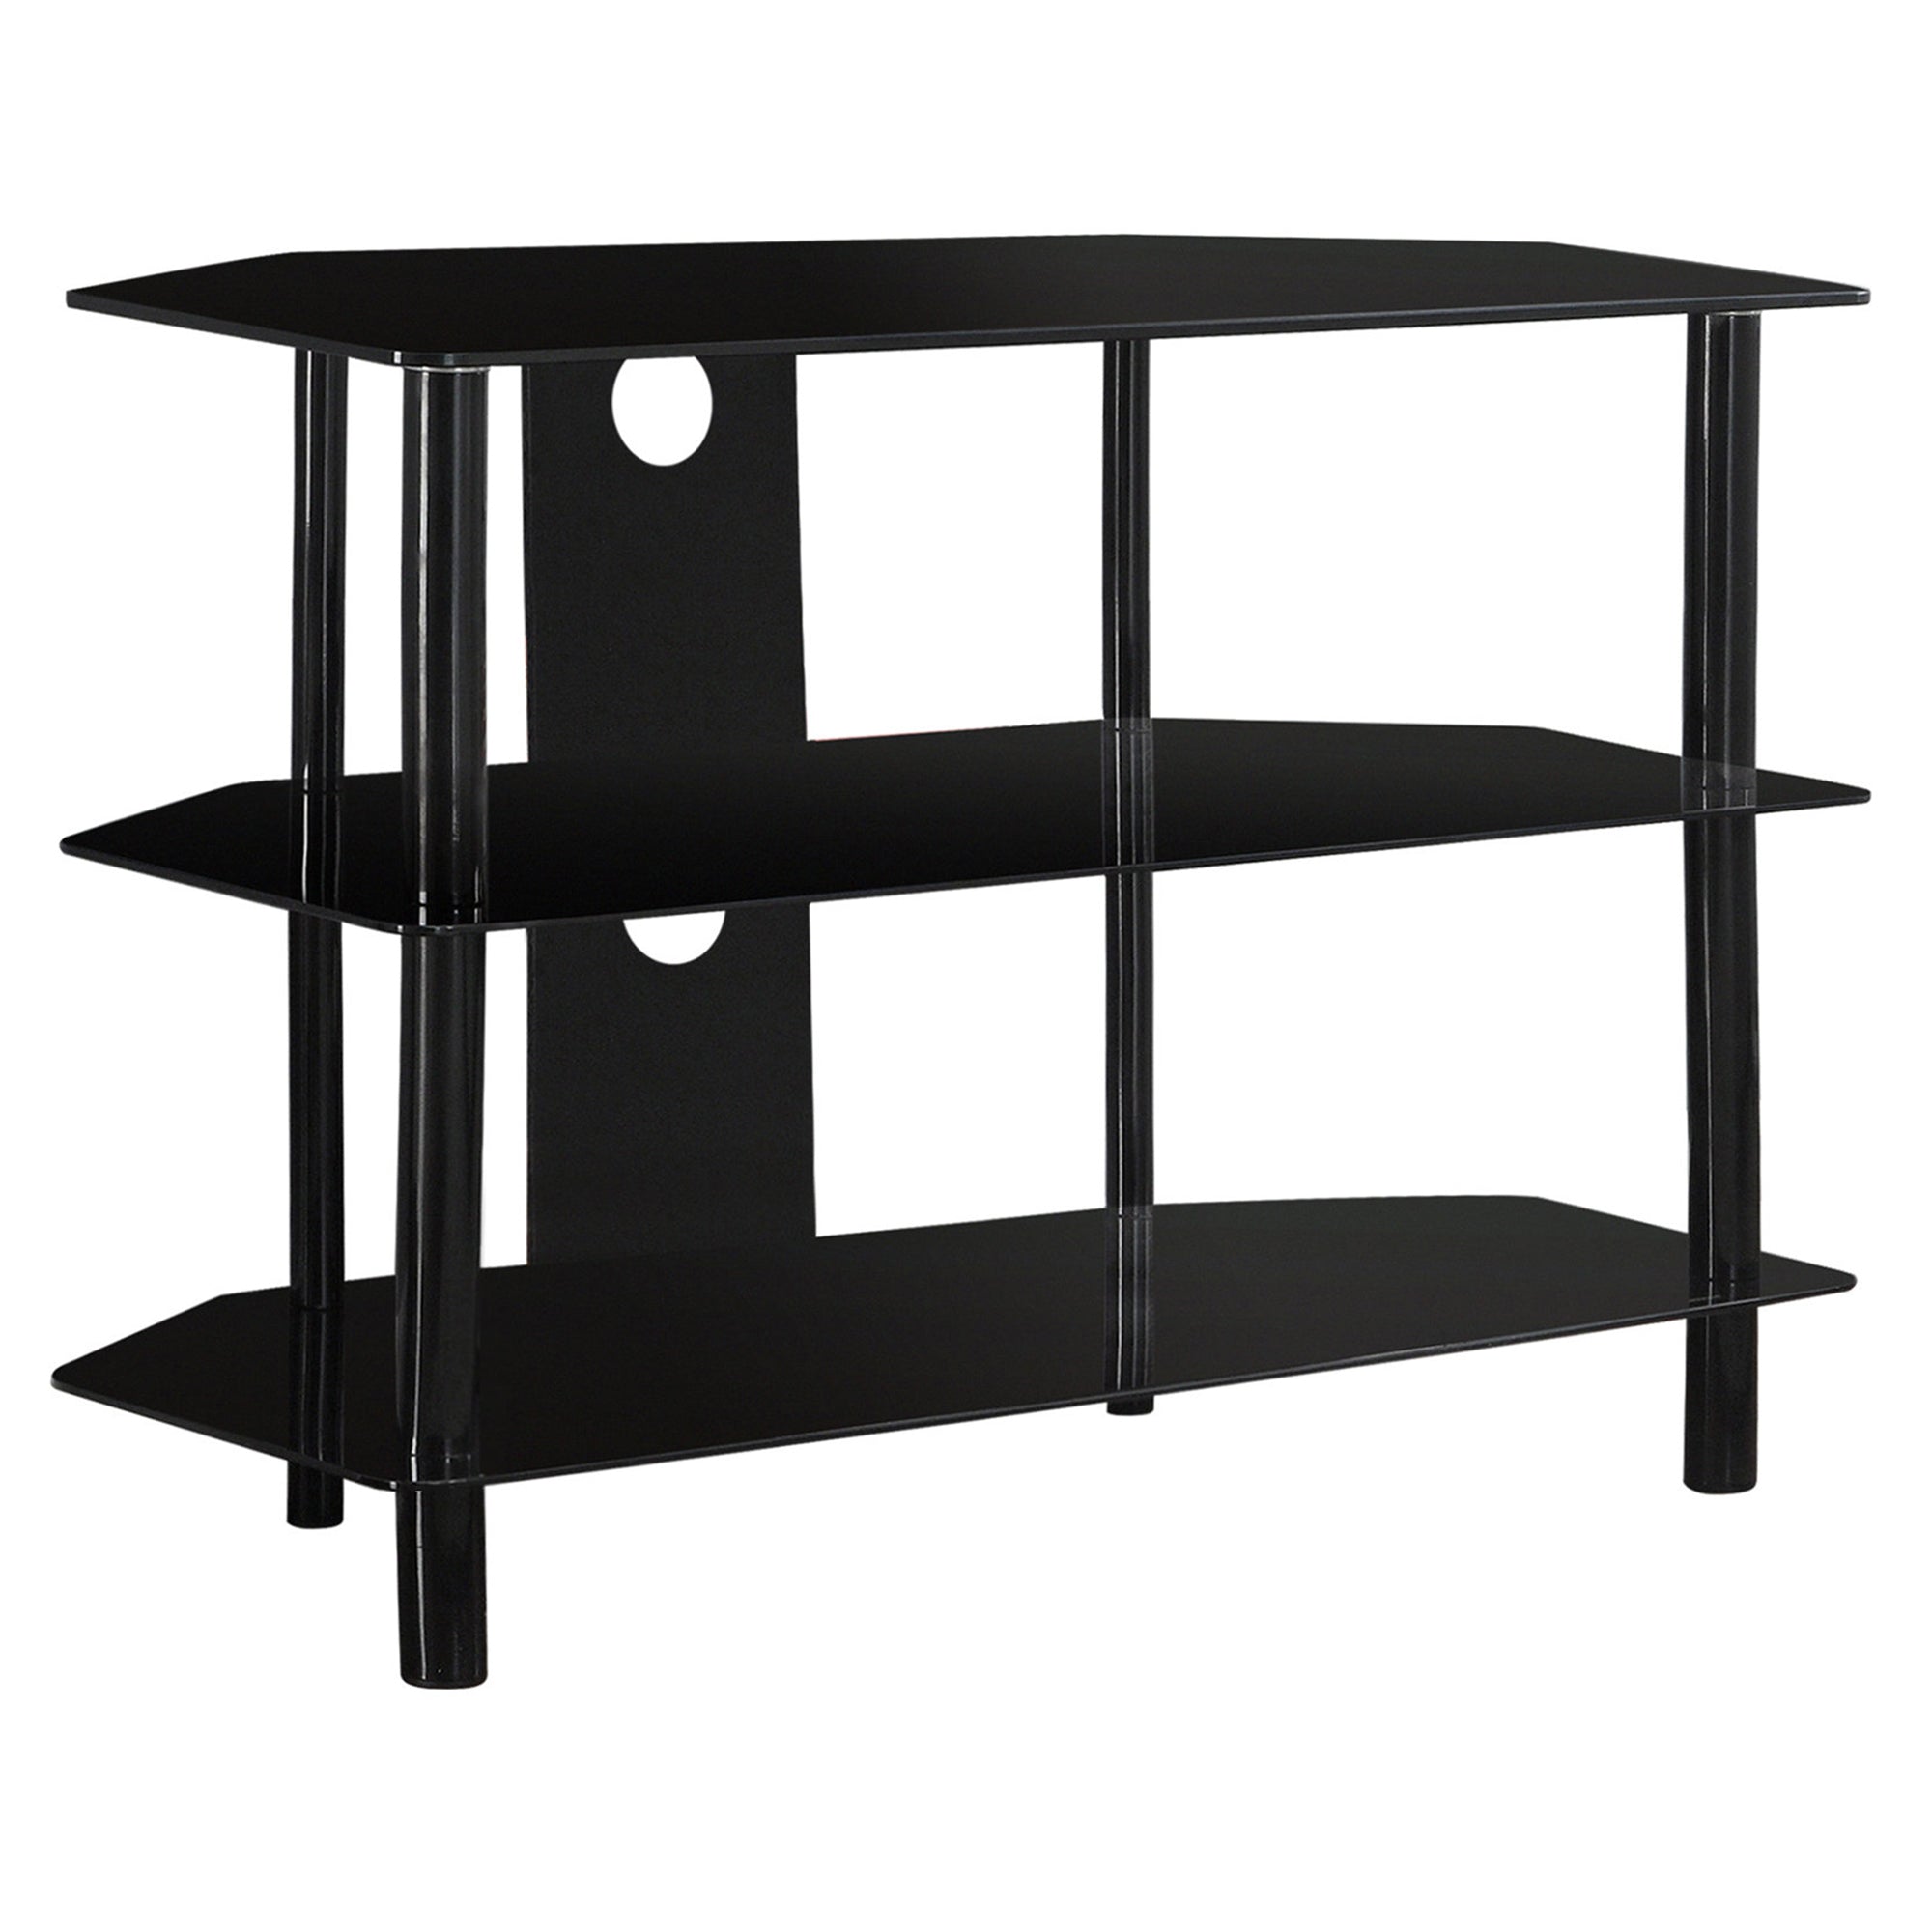 MN-512506    Tv Stand, 36 Inch, Console, Media Entertainment Center, Storage Cabinet, Living Room, Bedroom, Tempered Glass, Metal, Black, Black Tinted, Contemporary, Modern